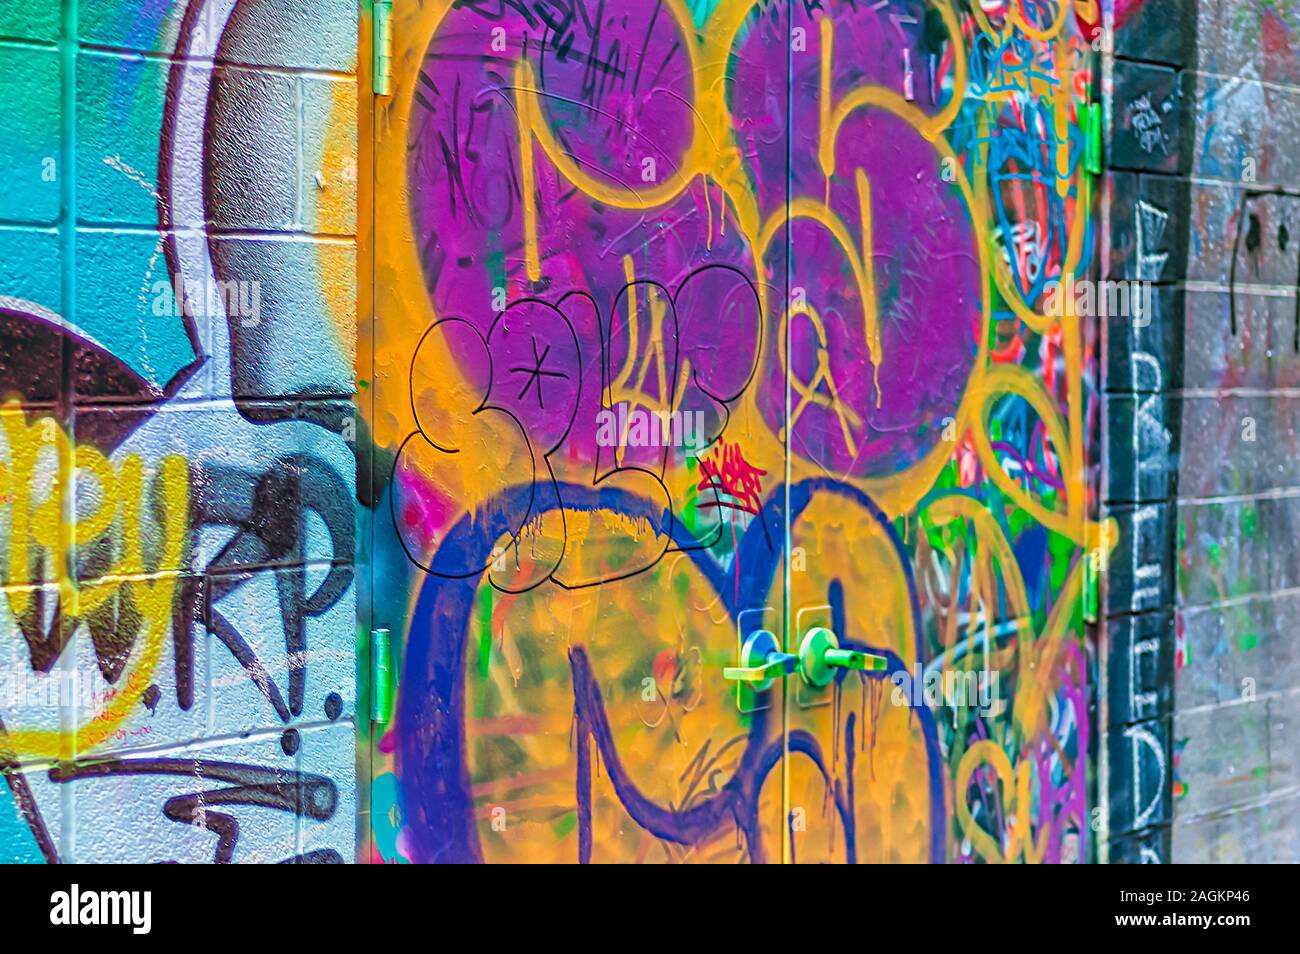 Graffiti adorned door at tripper's alley or poet's alley or graffiti alley or bubble gum alley next to Michigan theater at Ann Arbor, Michigan. Stock Photo